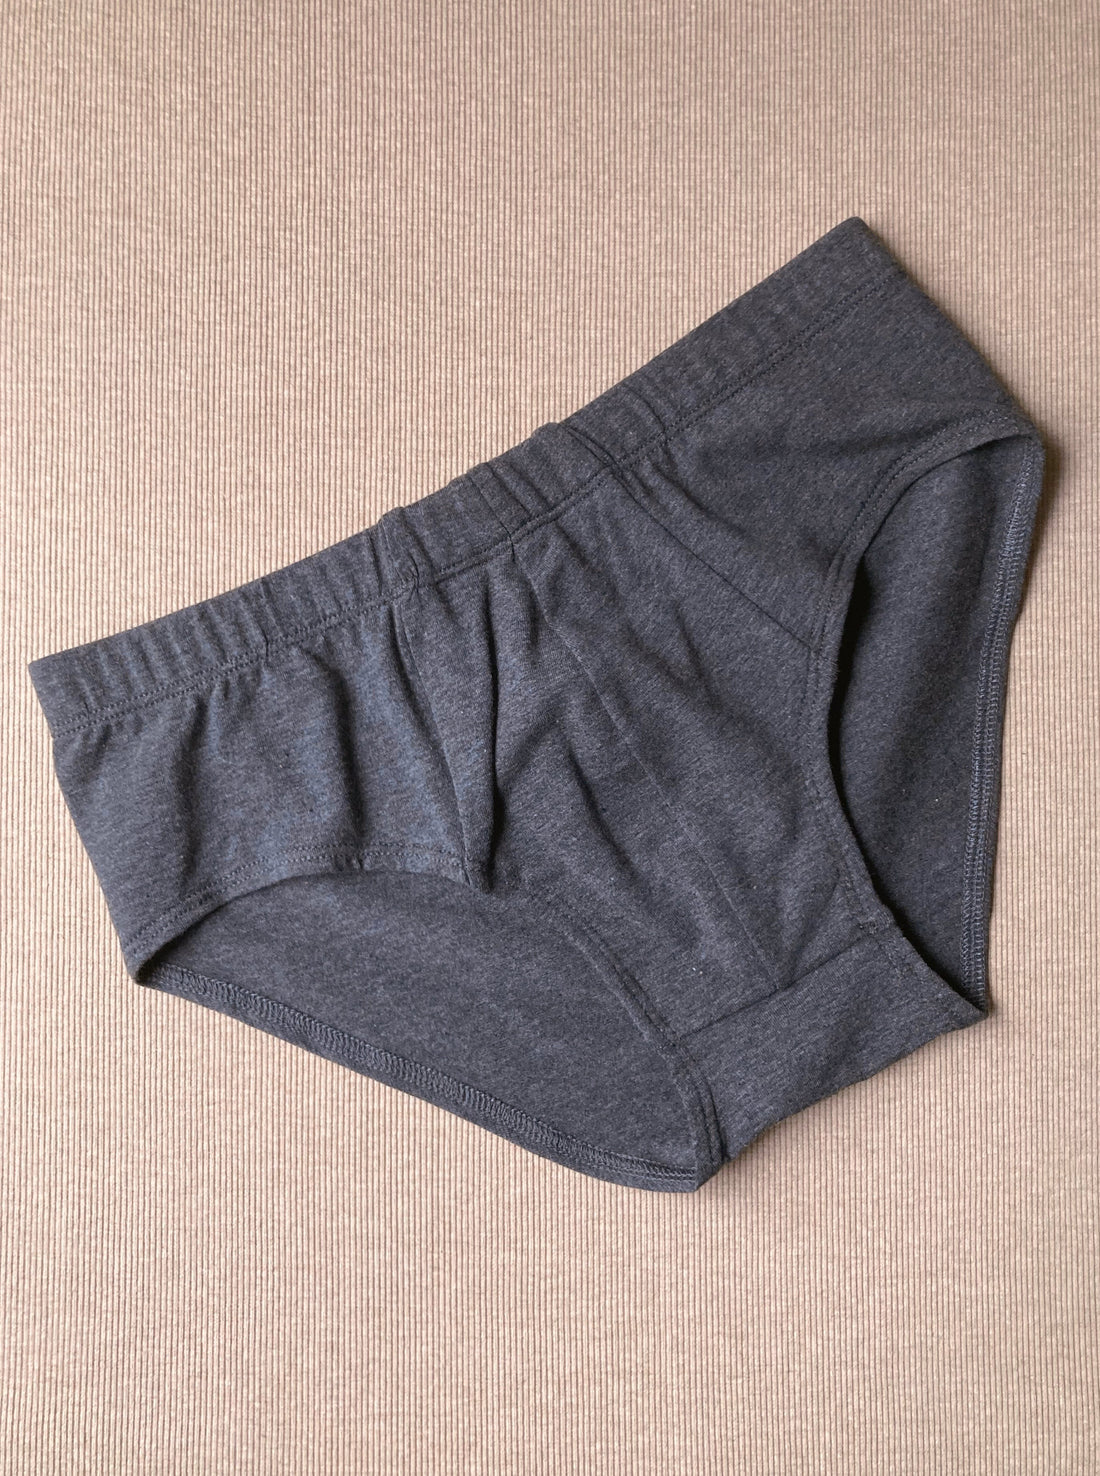 Men's Underpants: Browse 600+ Products up to −78%